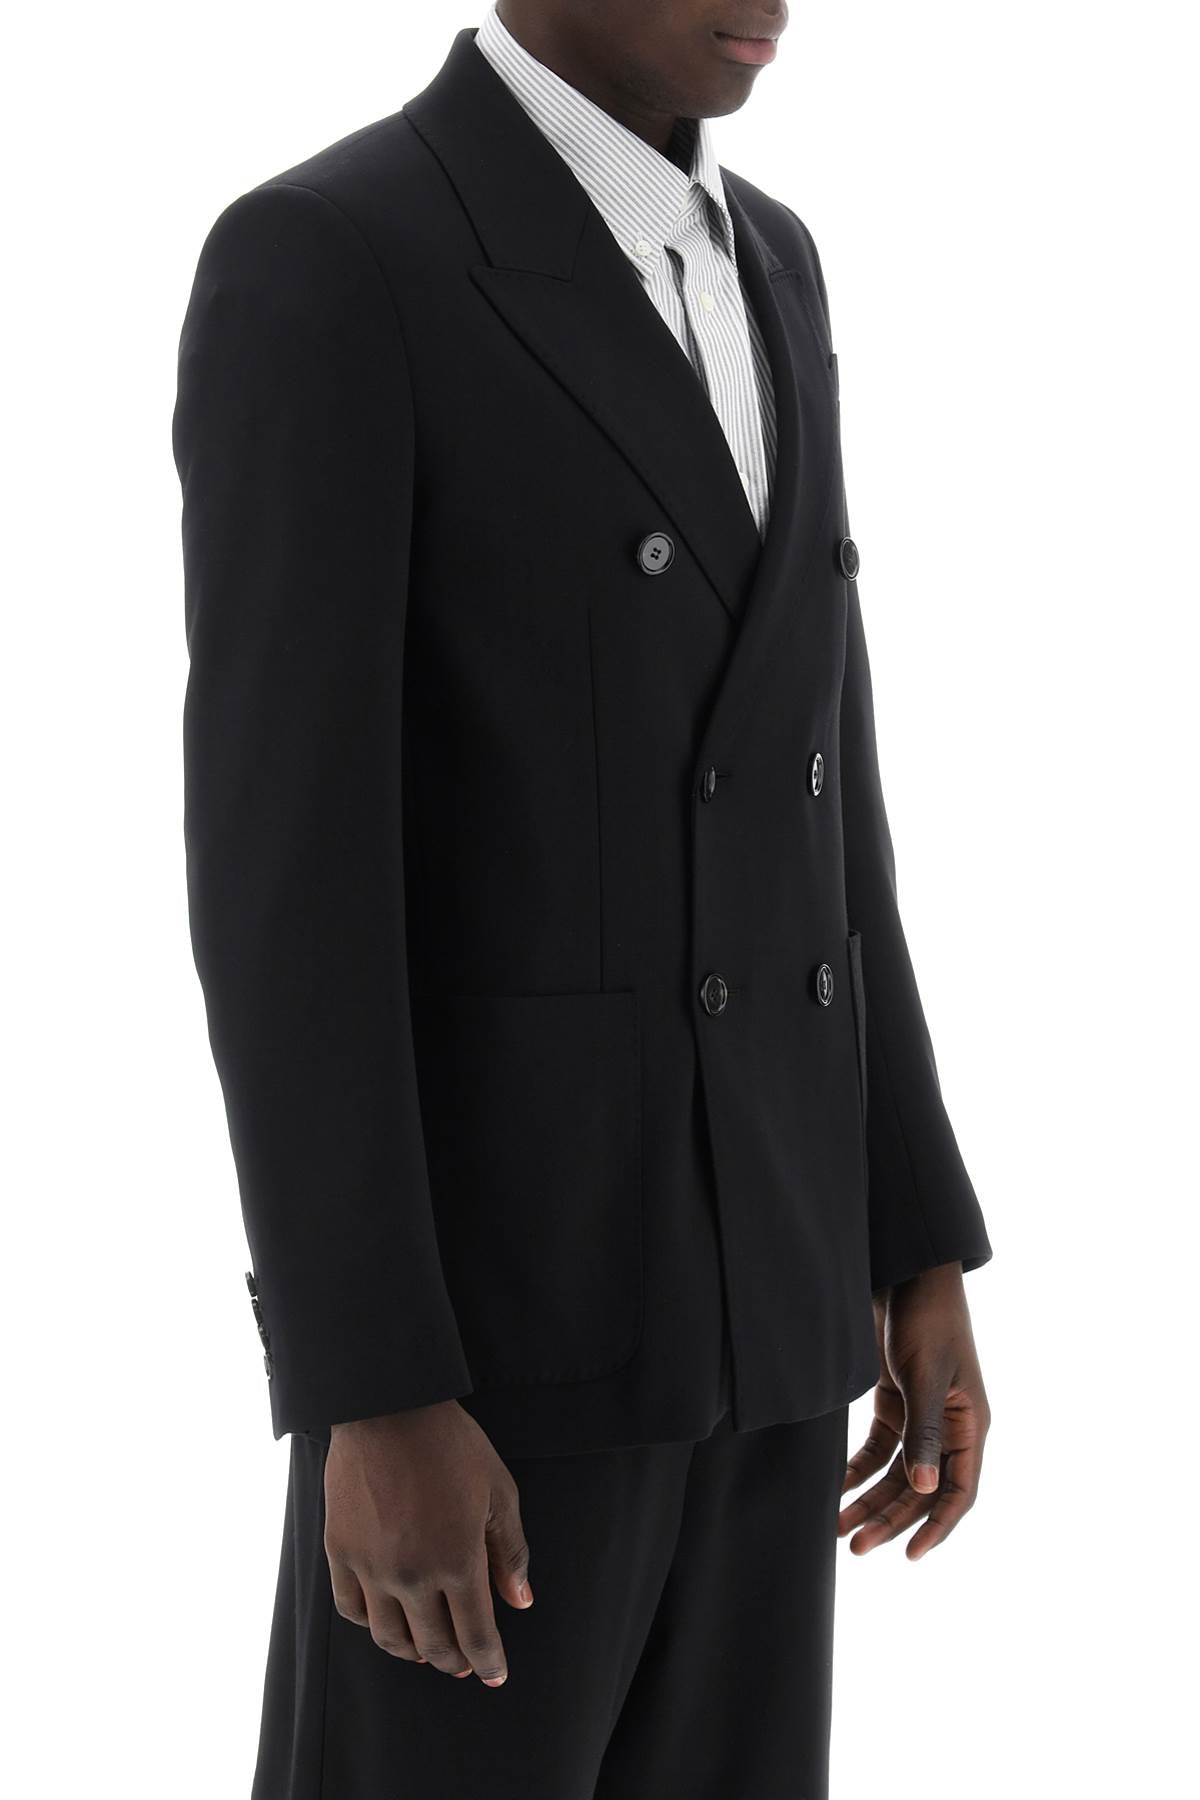 Ami paris double-breasted wool jacket for men-1